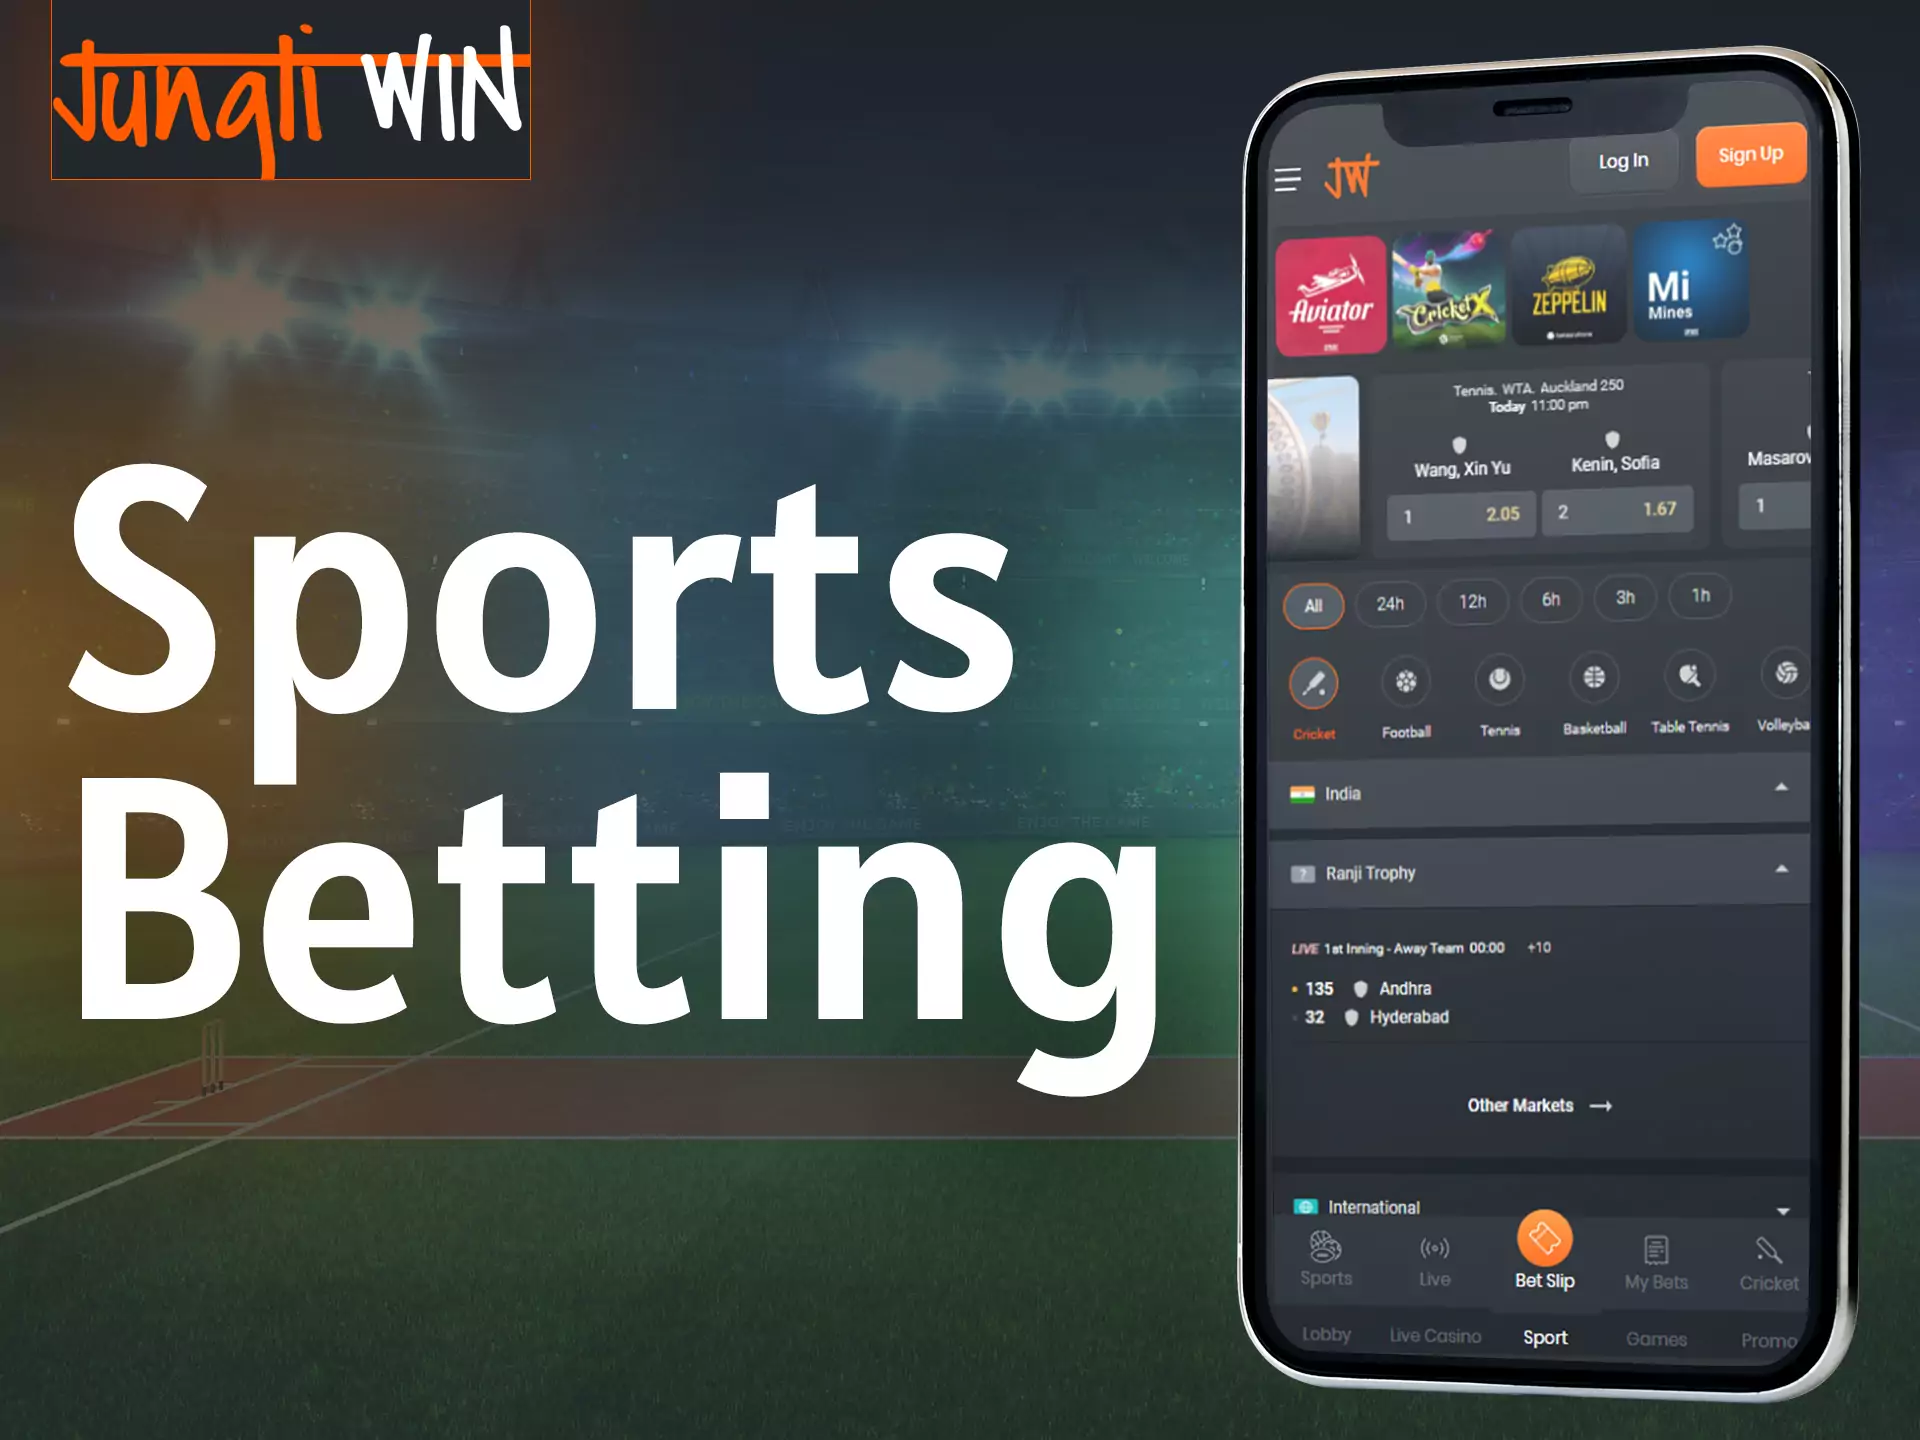 If you are a sports fan, place bets on your favorite teams in the Jungliwin app.